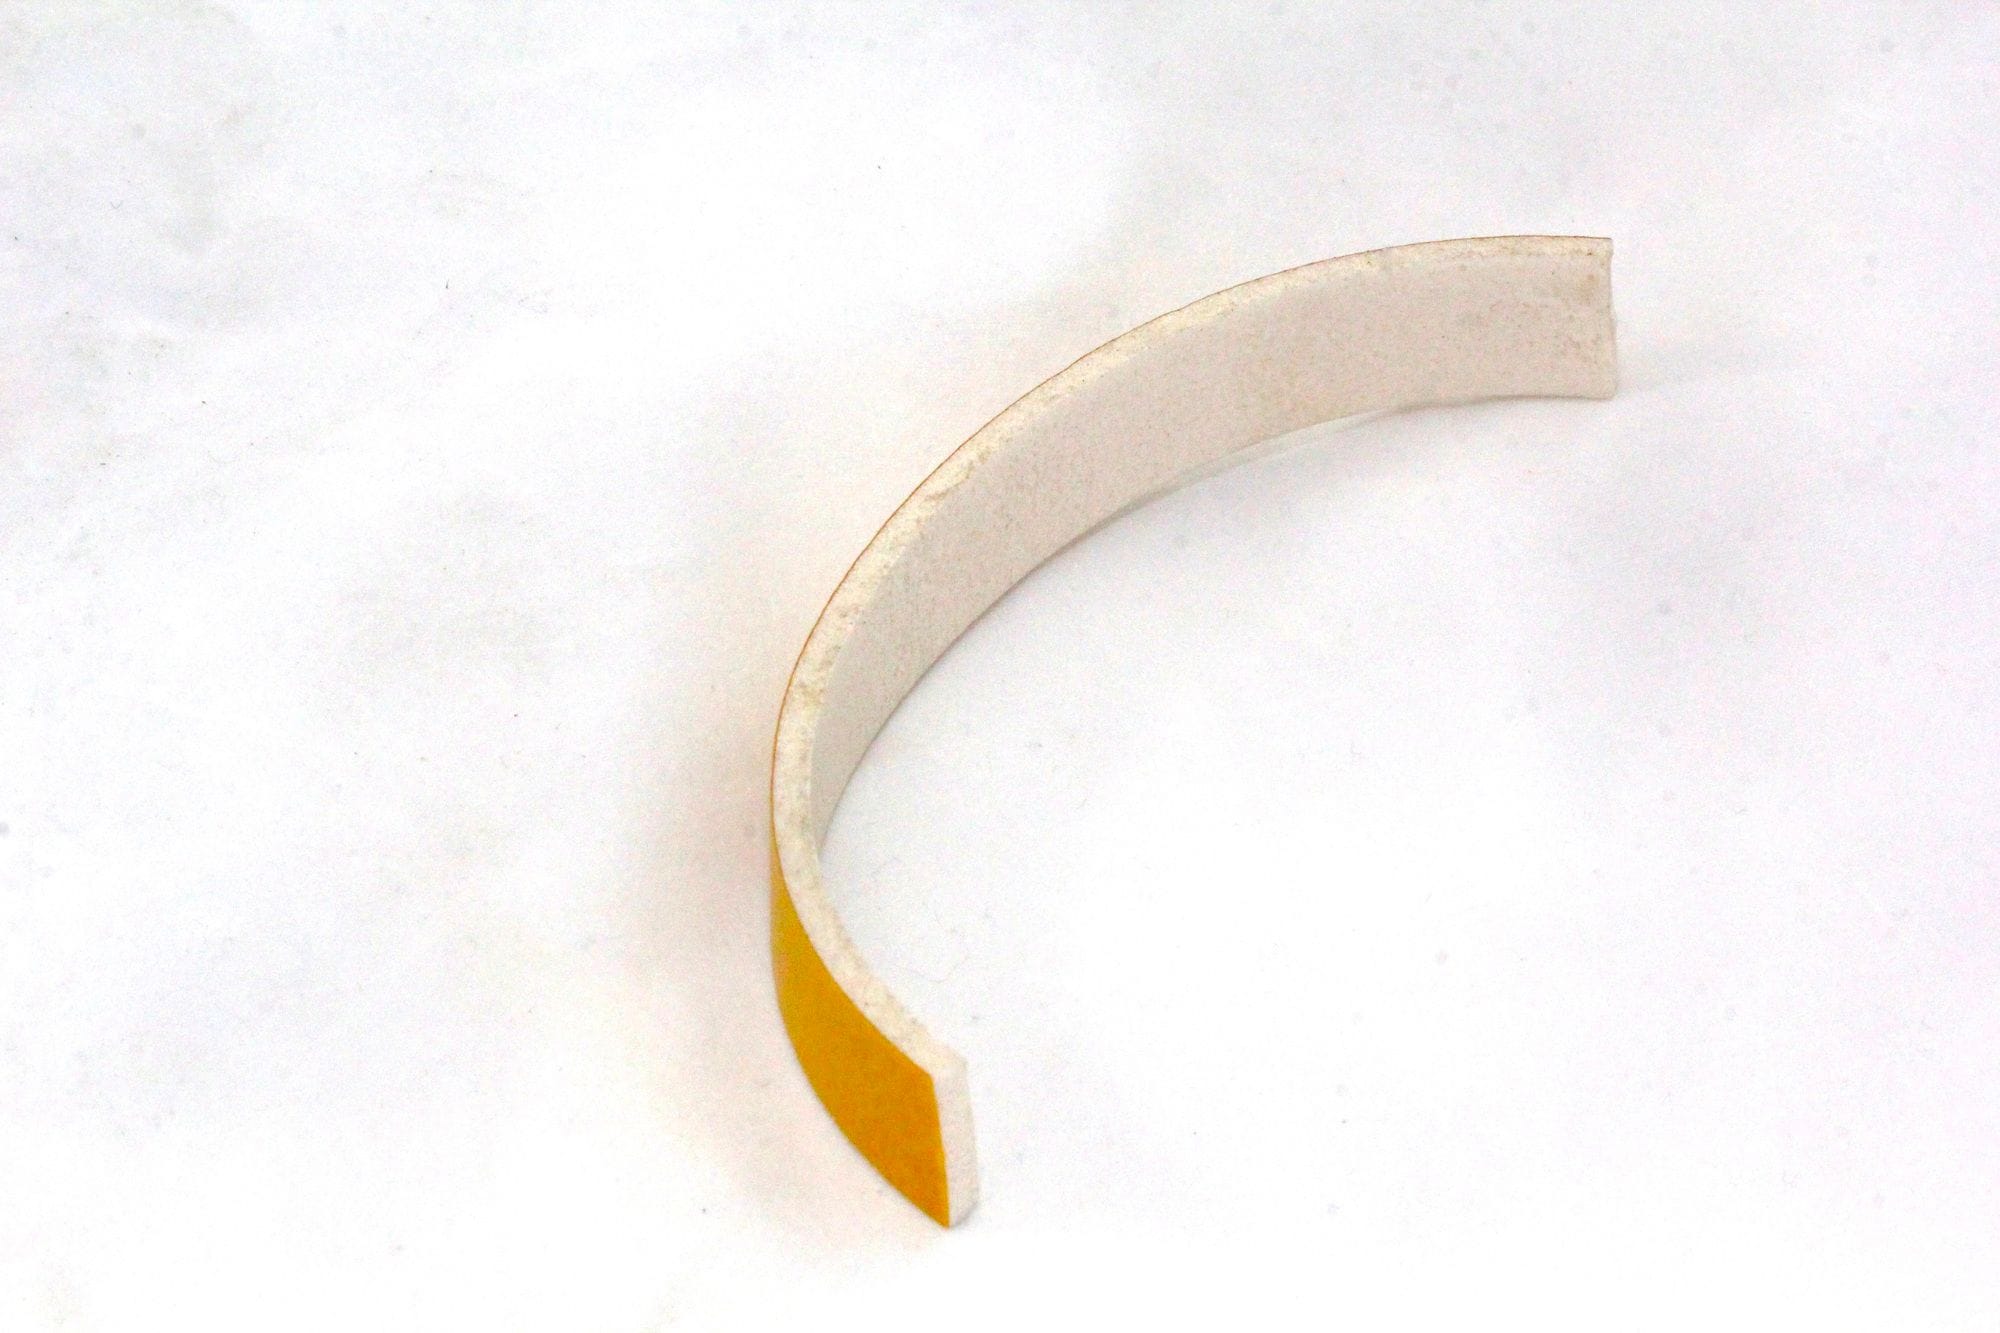 Silicone adhesive backed sponge - 3mm thick